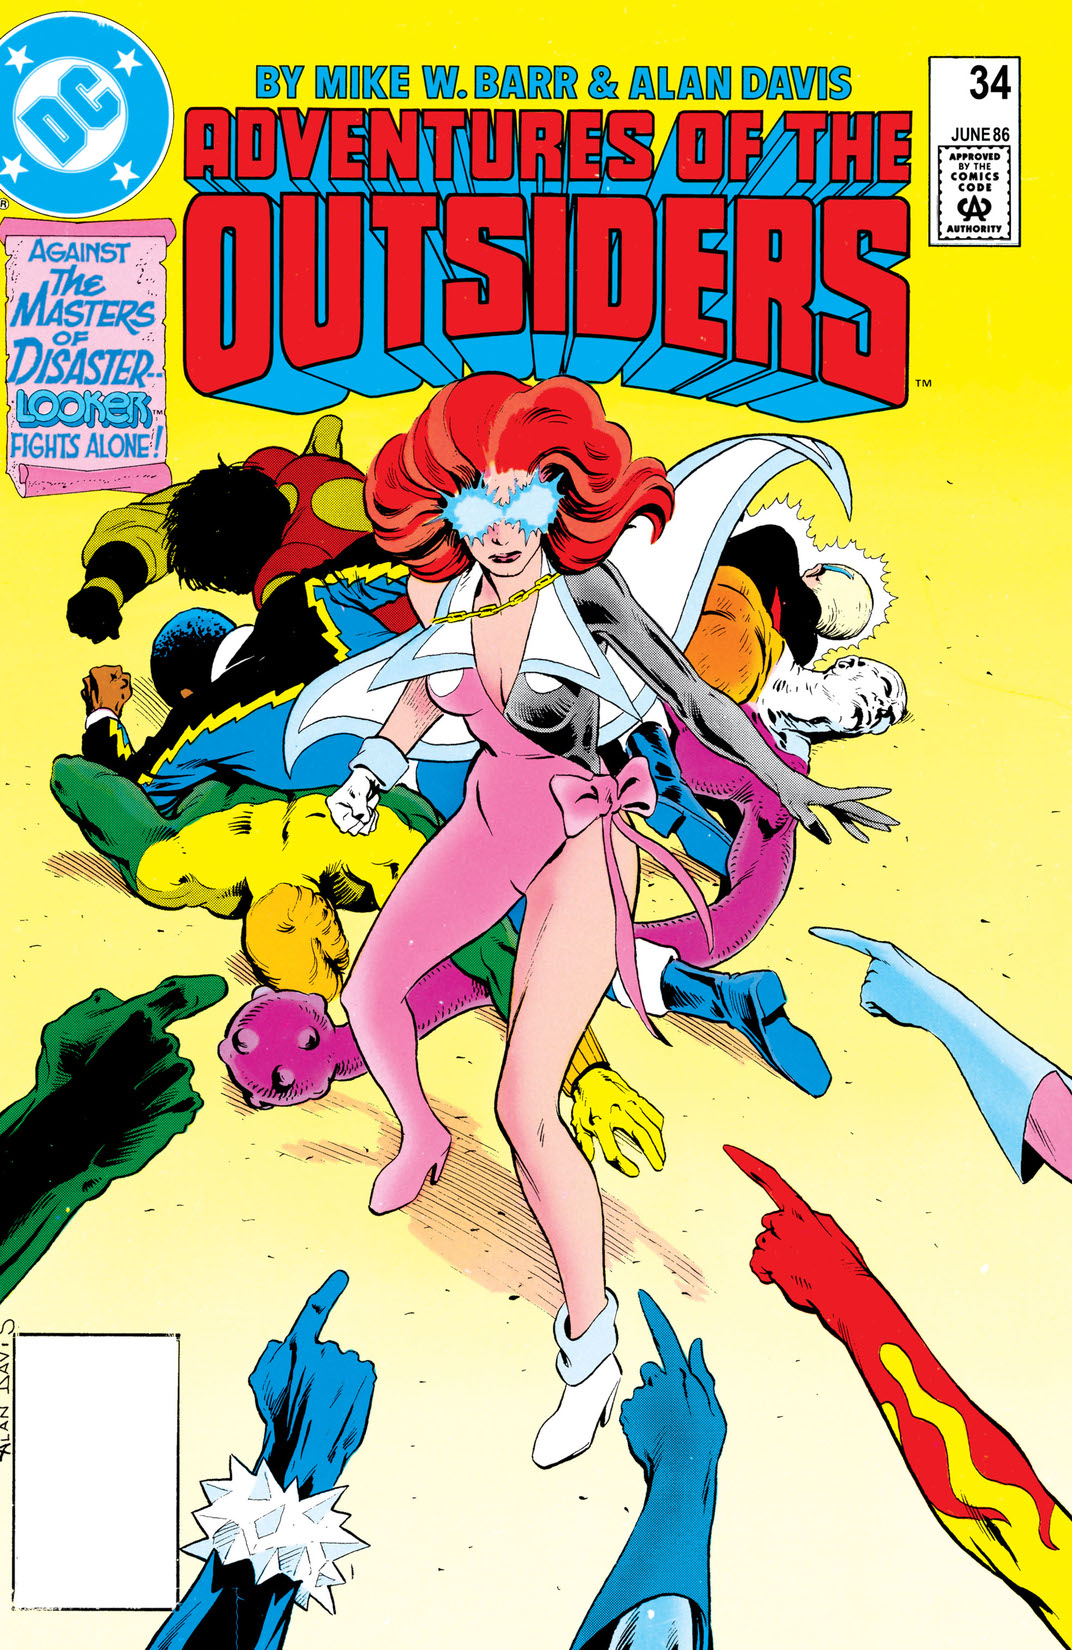 Adventures of the Outsiders (1986-) #34 preview images